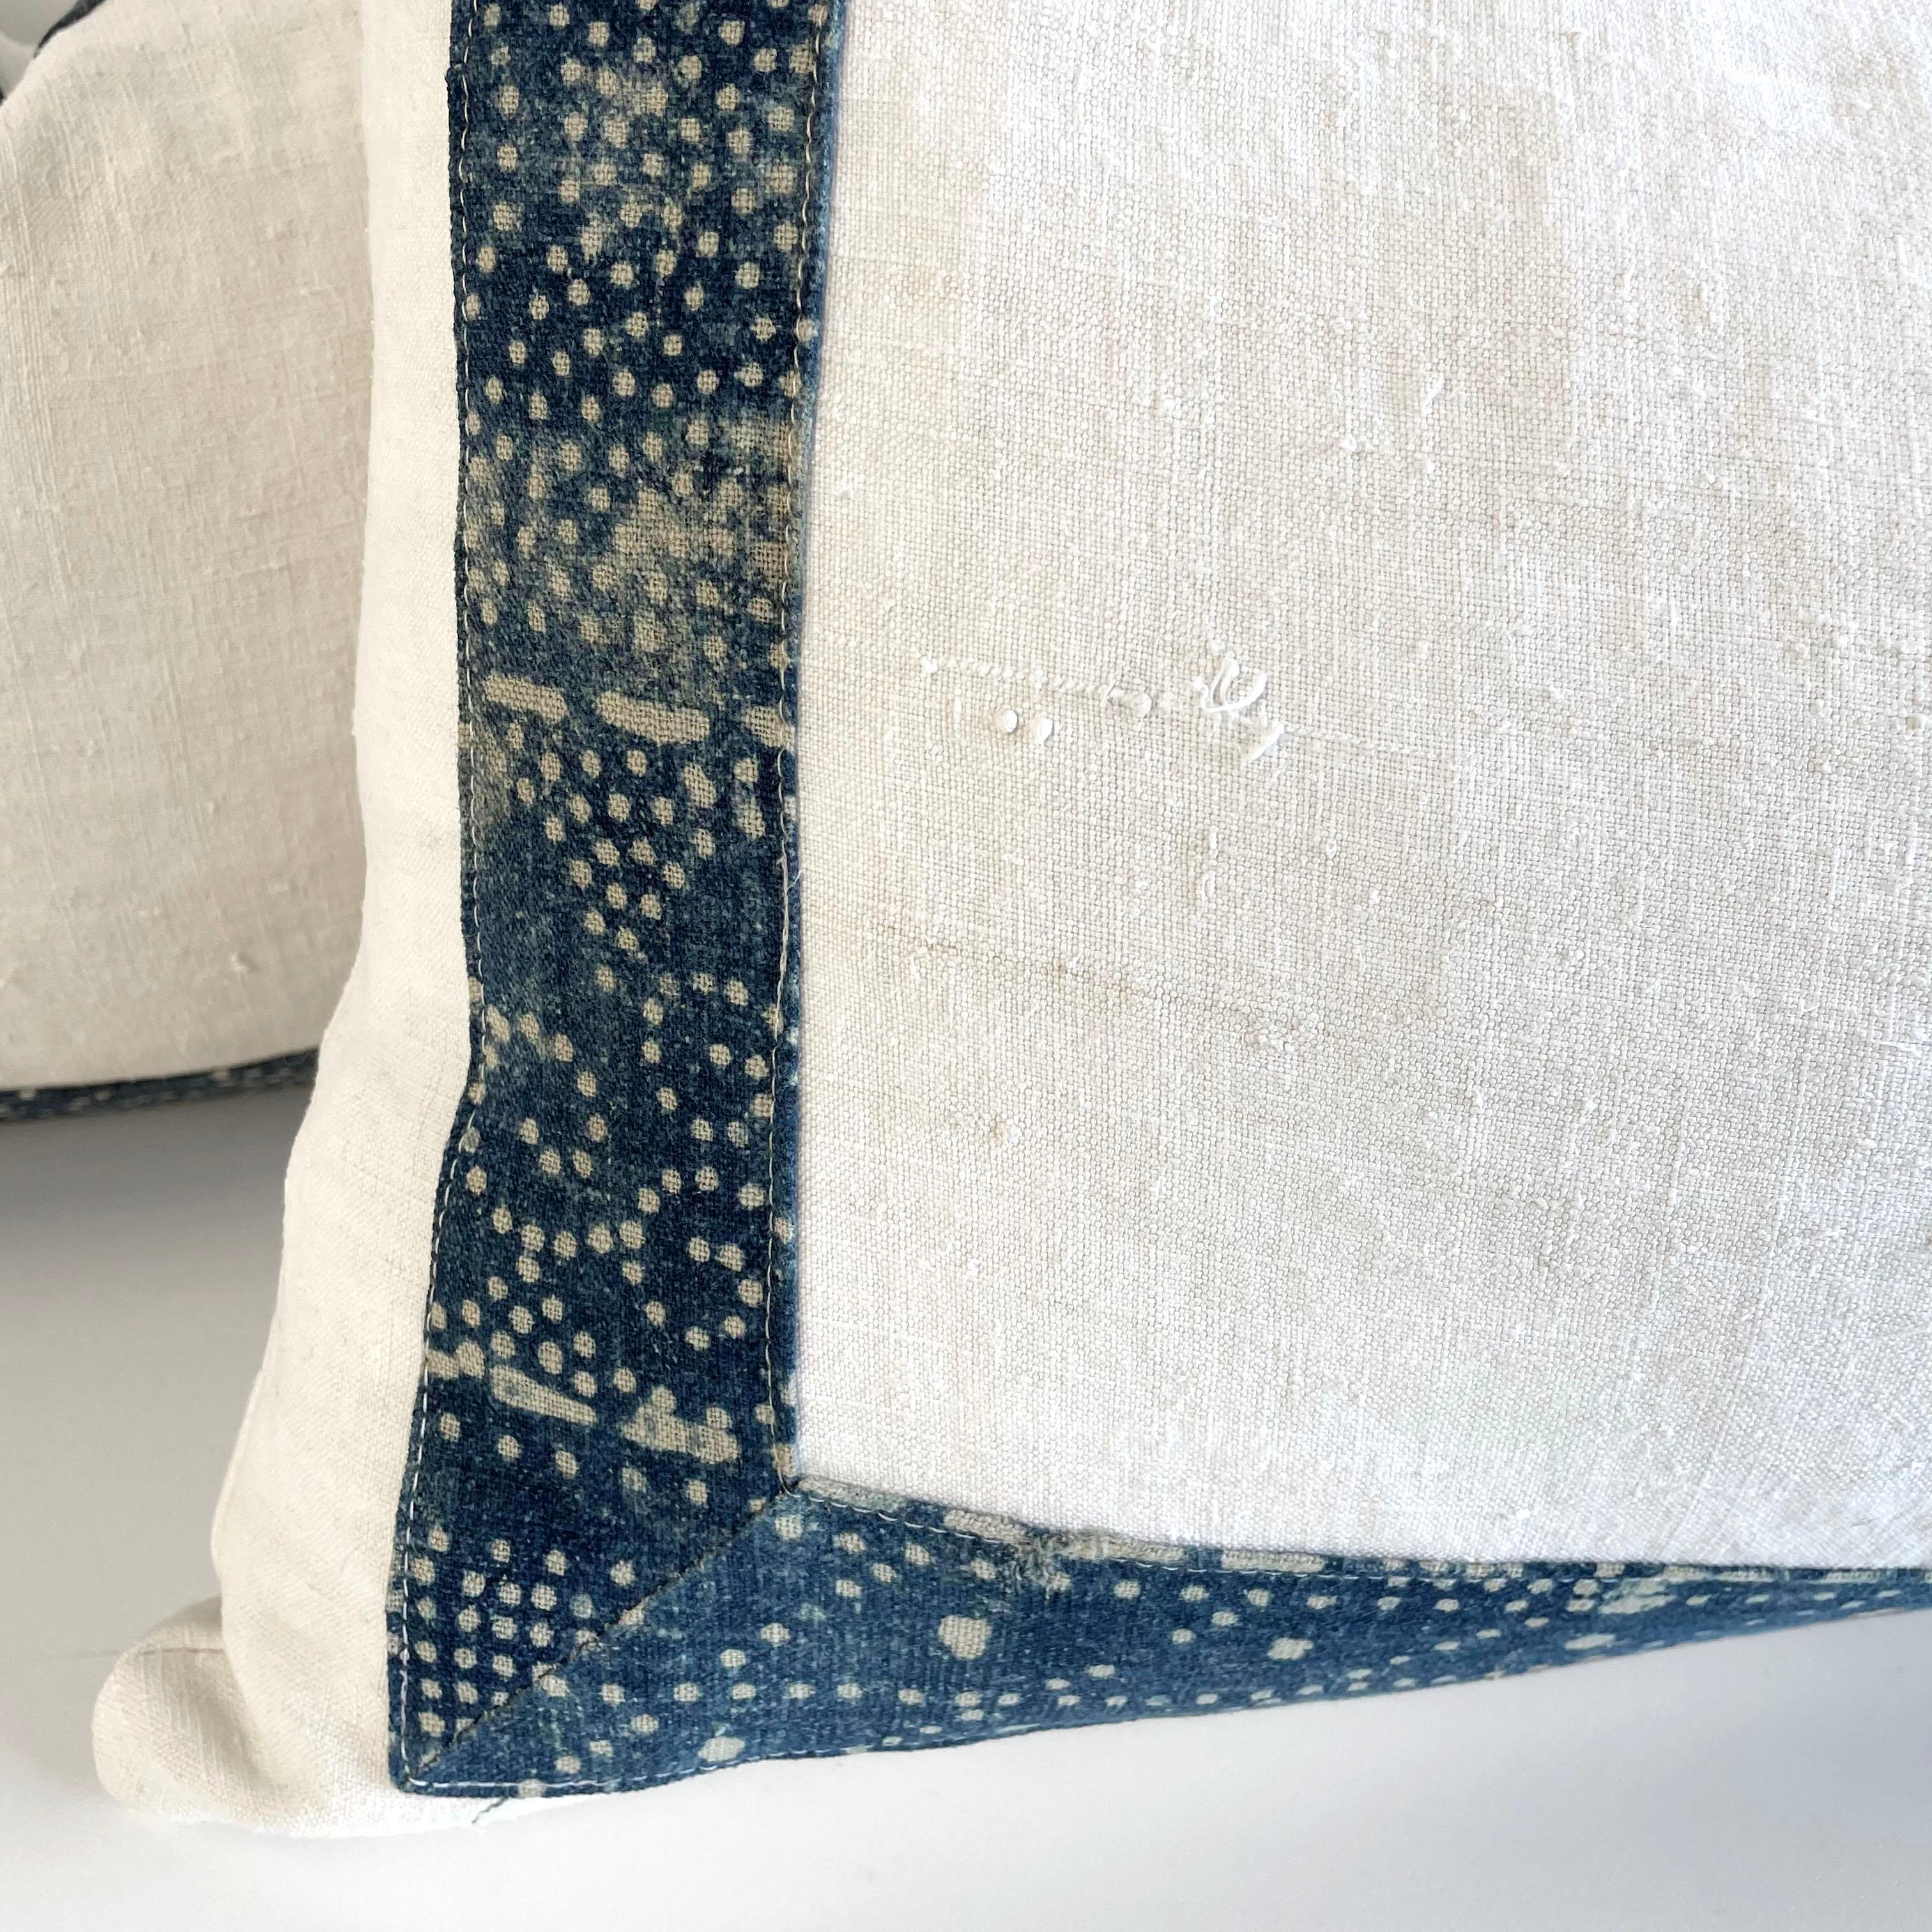 Vintage custom made French white and blue batik accent pillow with down feather insert. This vintage textile pillow face features a white vintage front with blue batik boarder. The back is also in white vintage linen. Our pillows are constructed